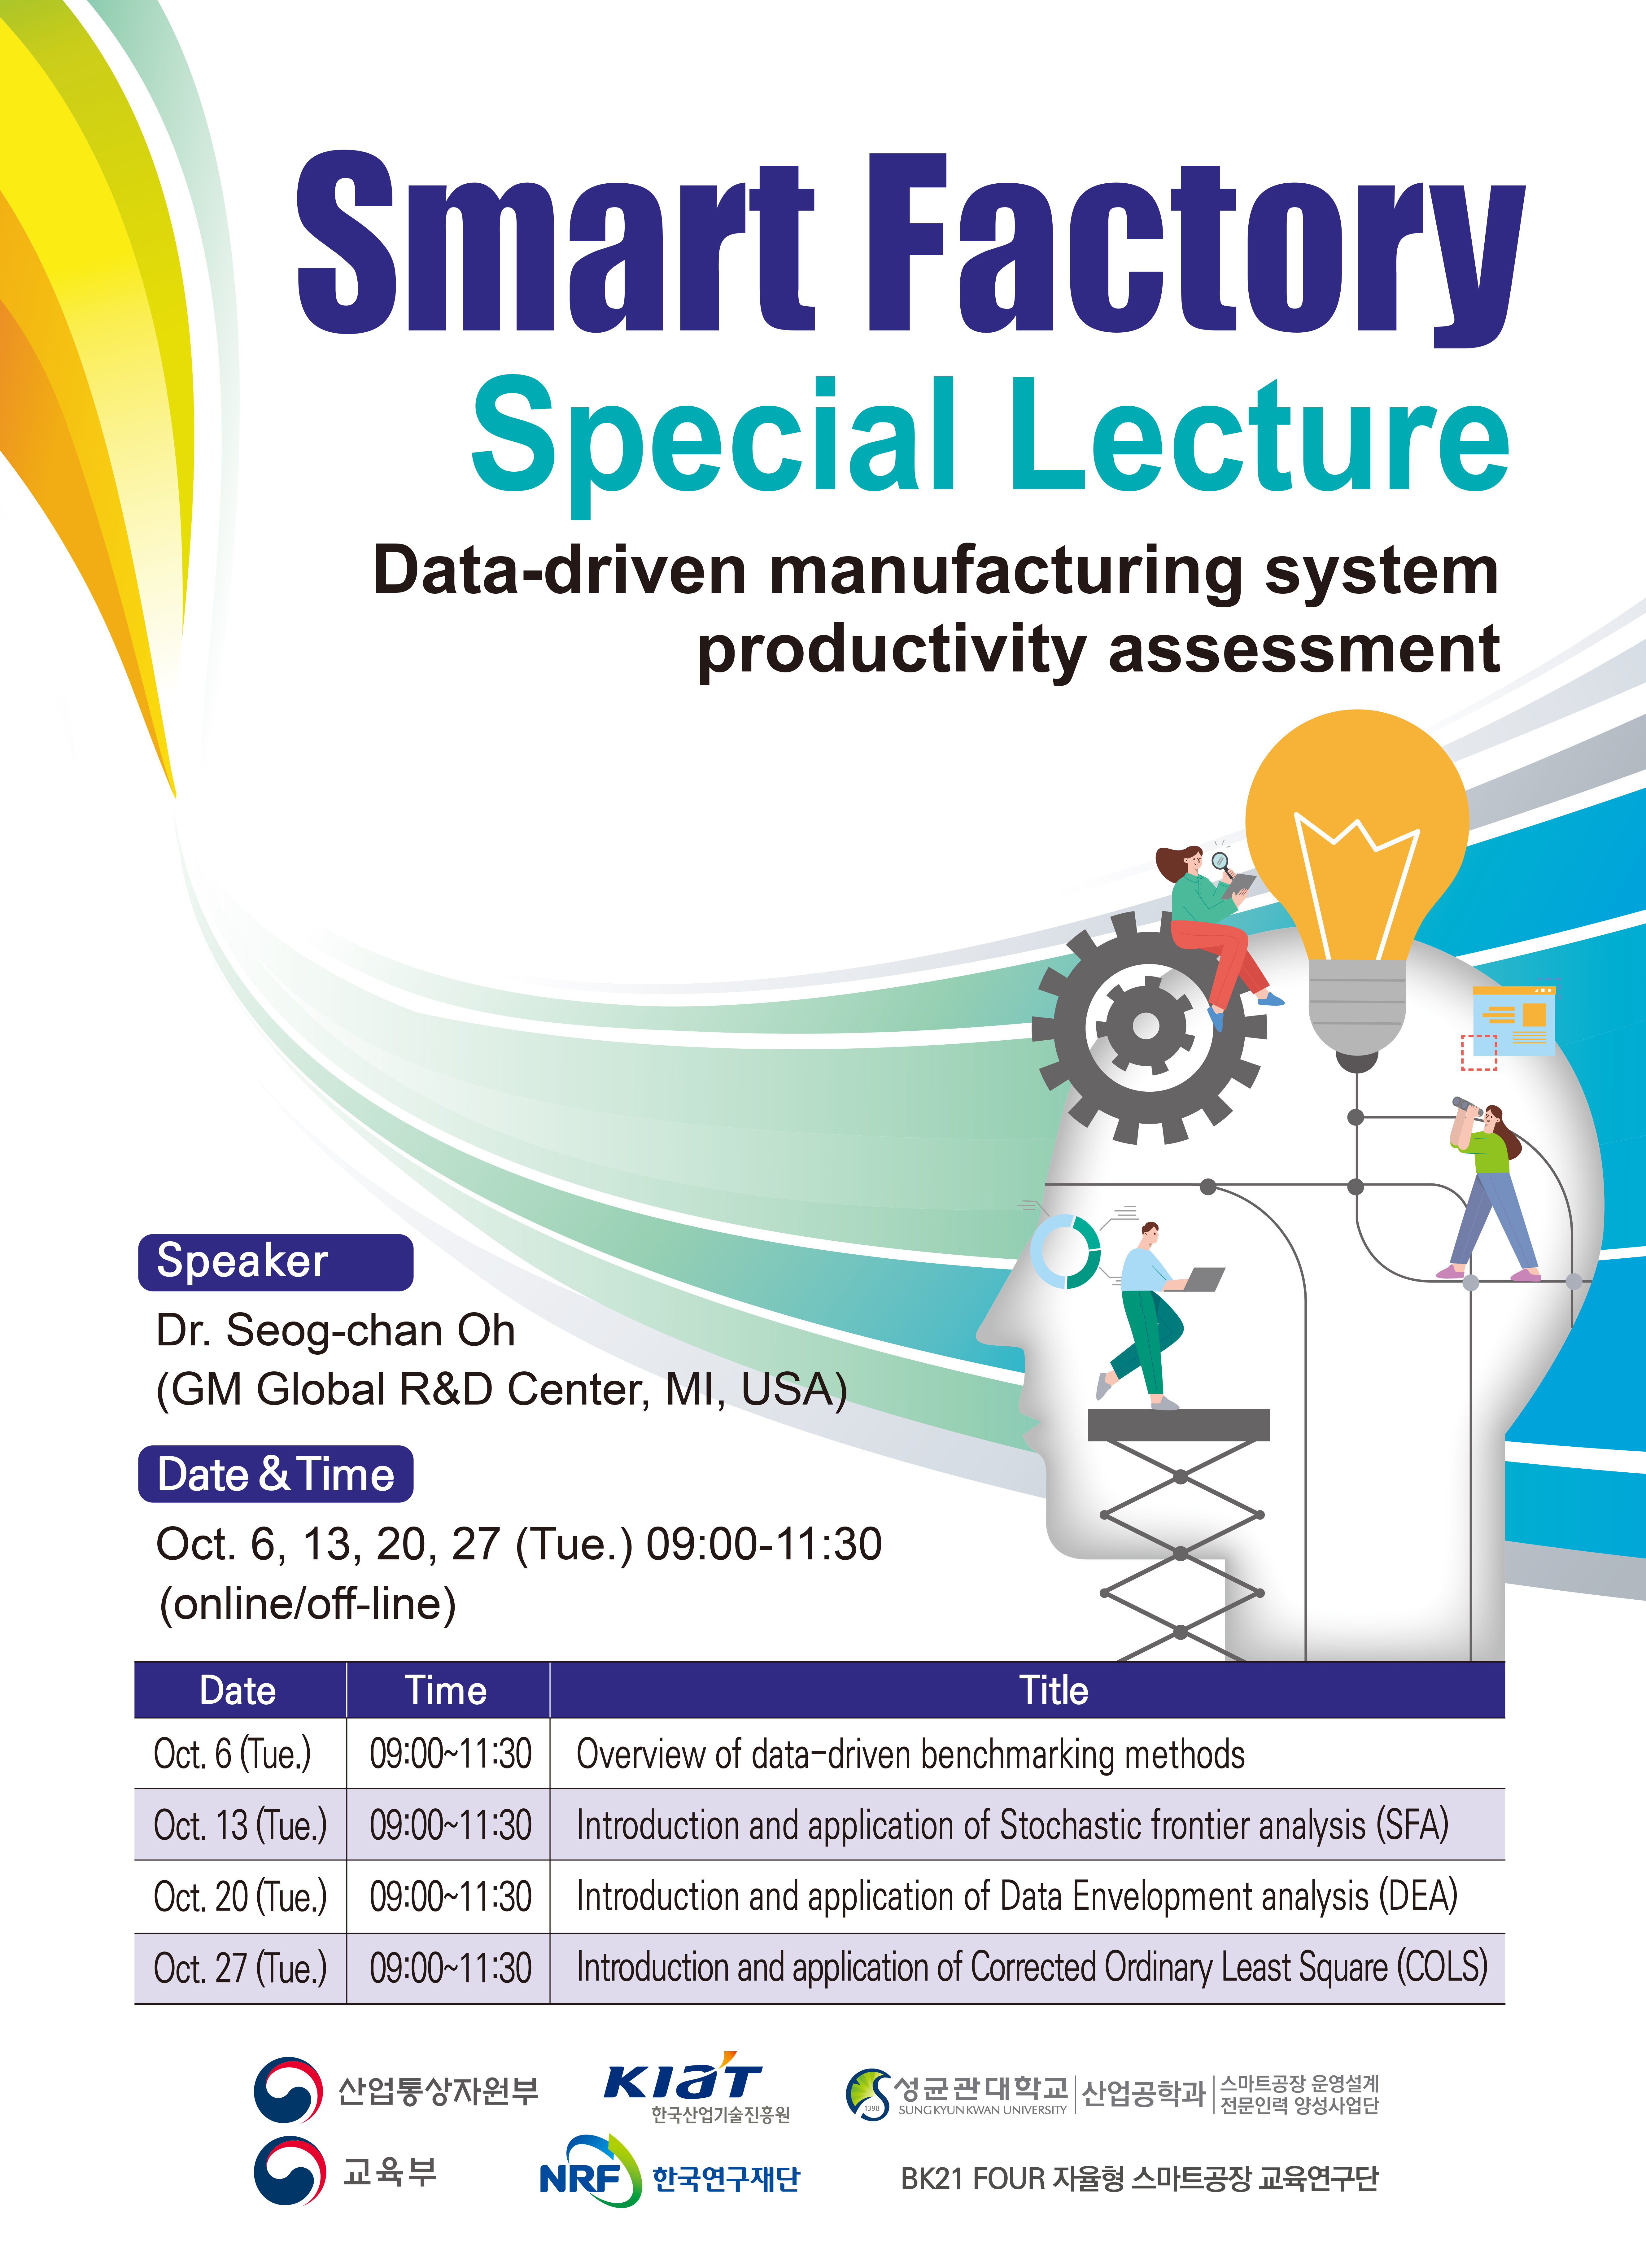 Smart Factory Special Lecture